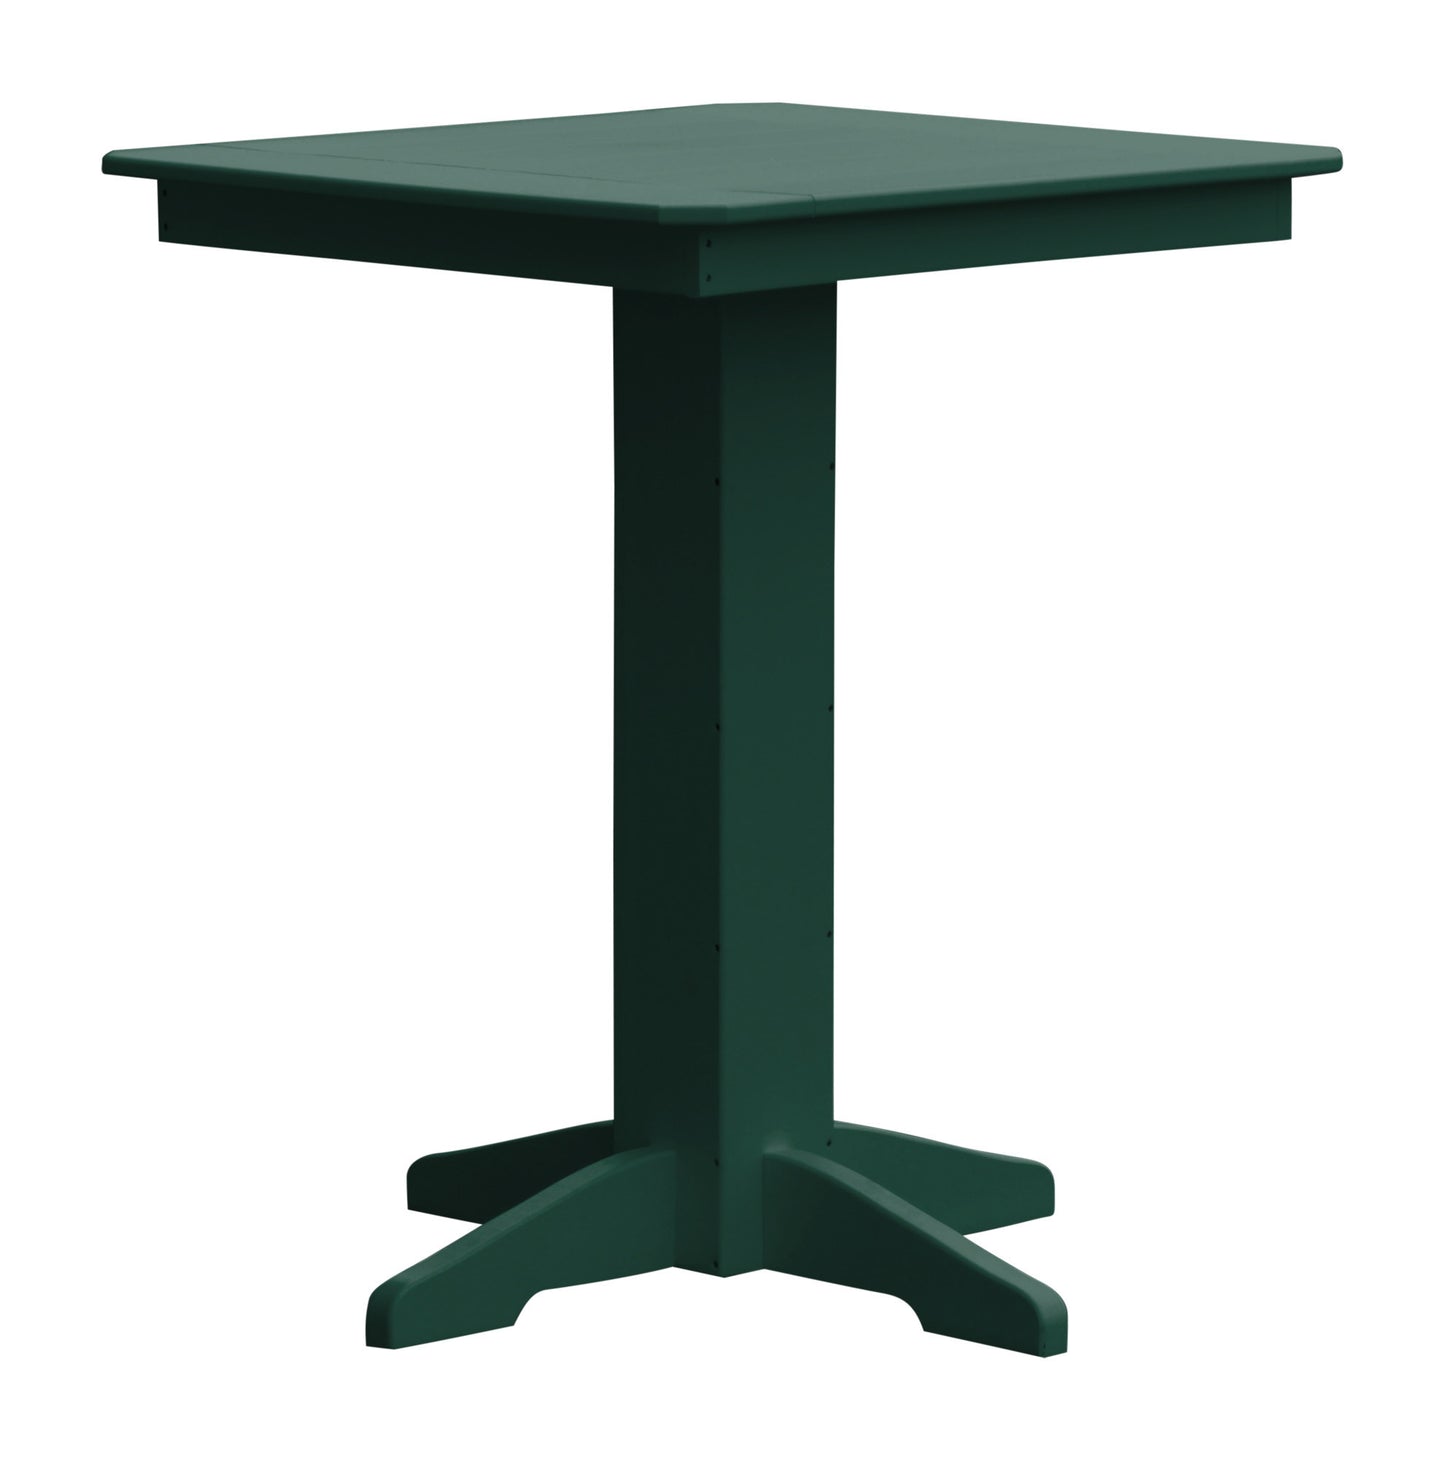 A&L Furniture Recycled Plastic 33" Square Bar Table - Turf Green